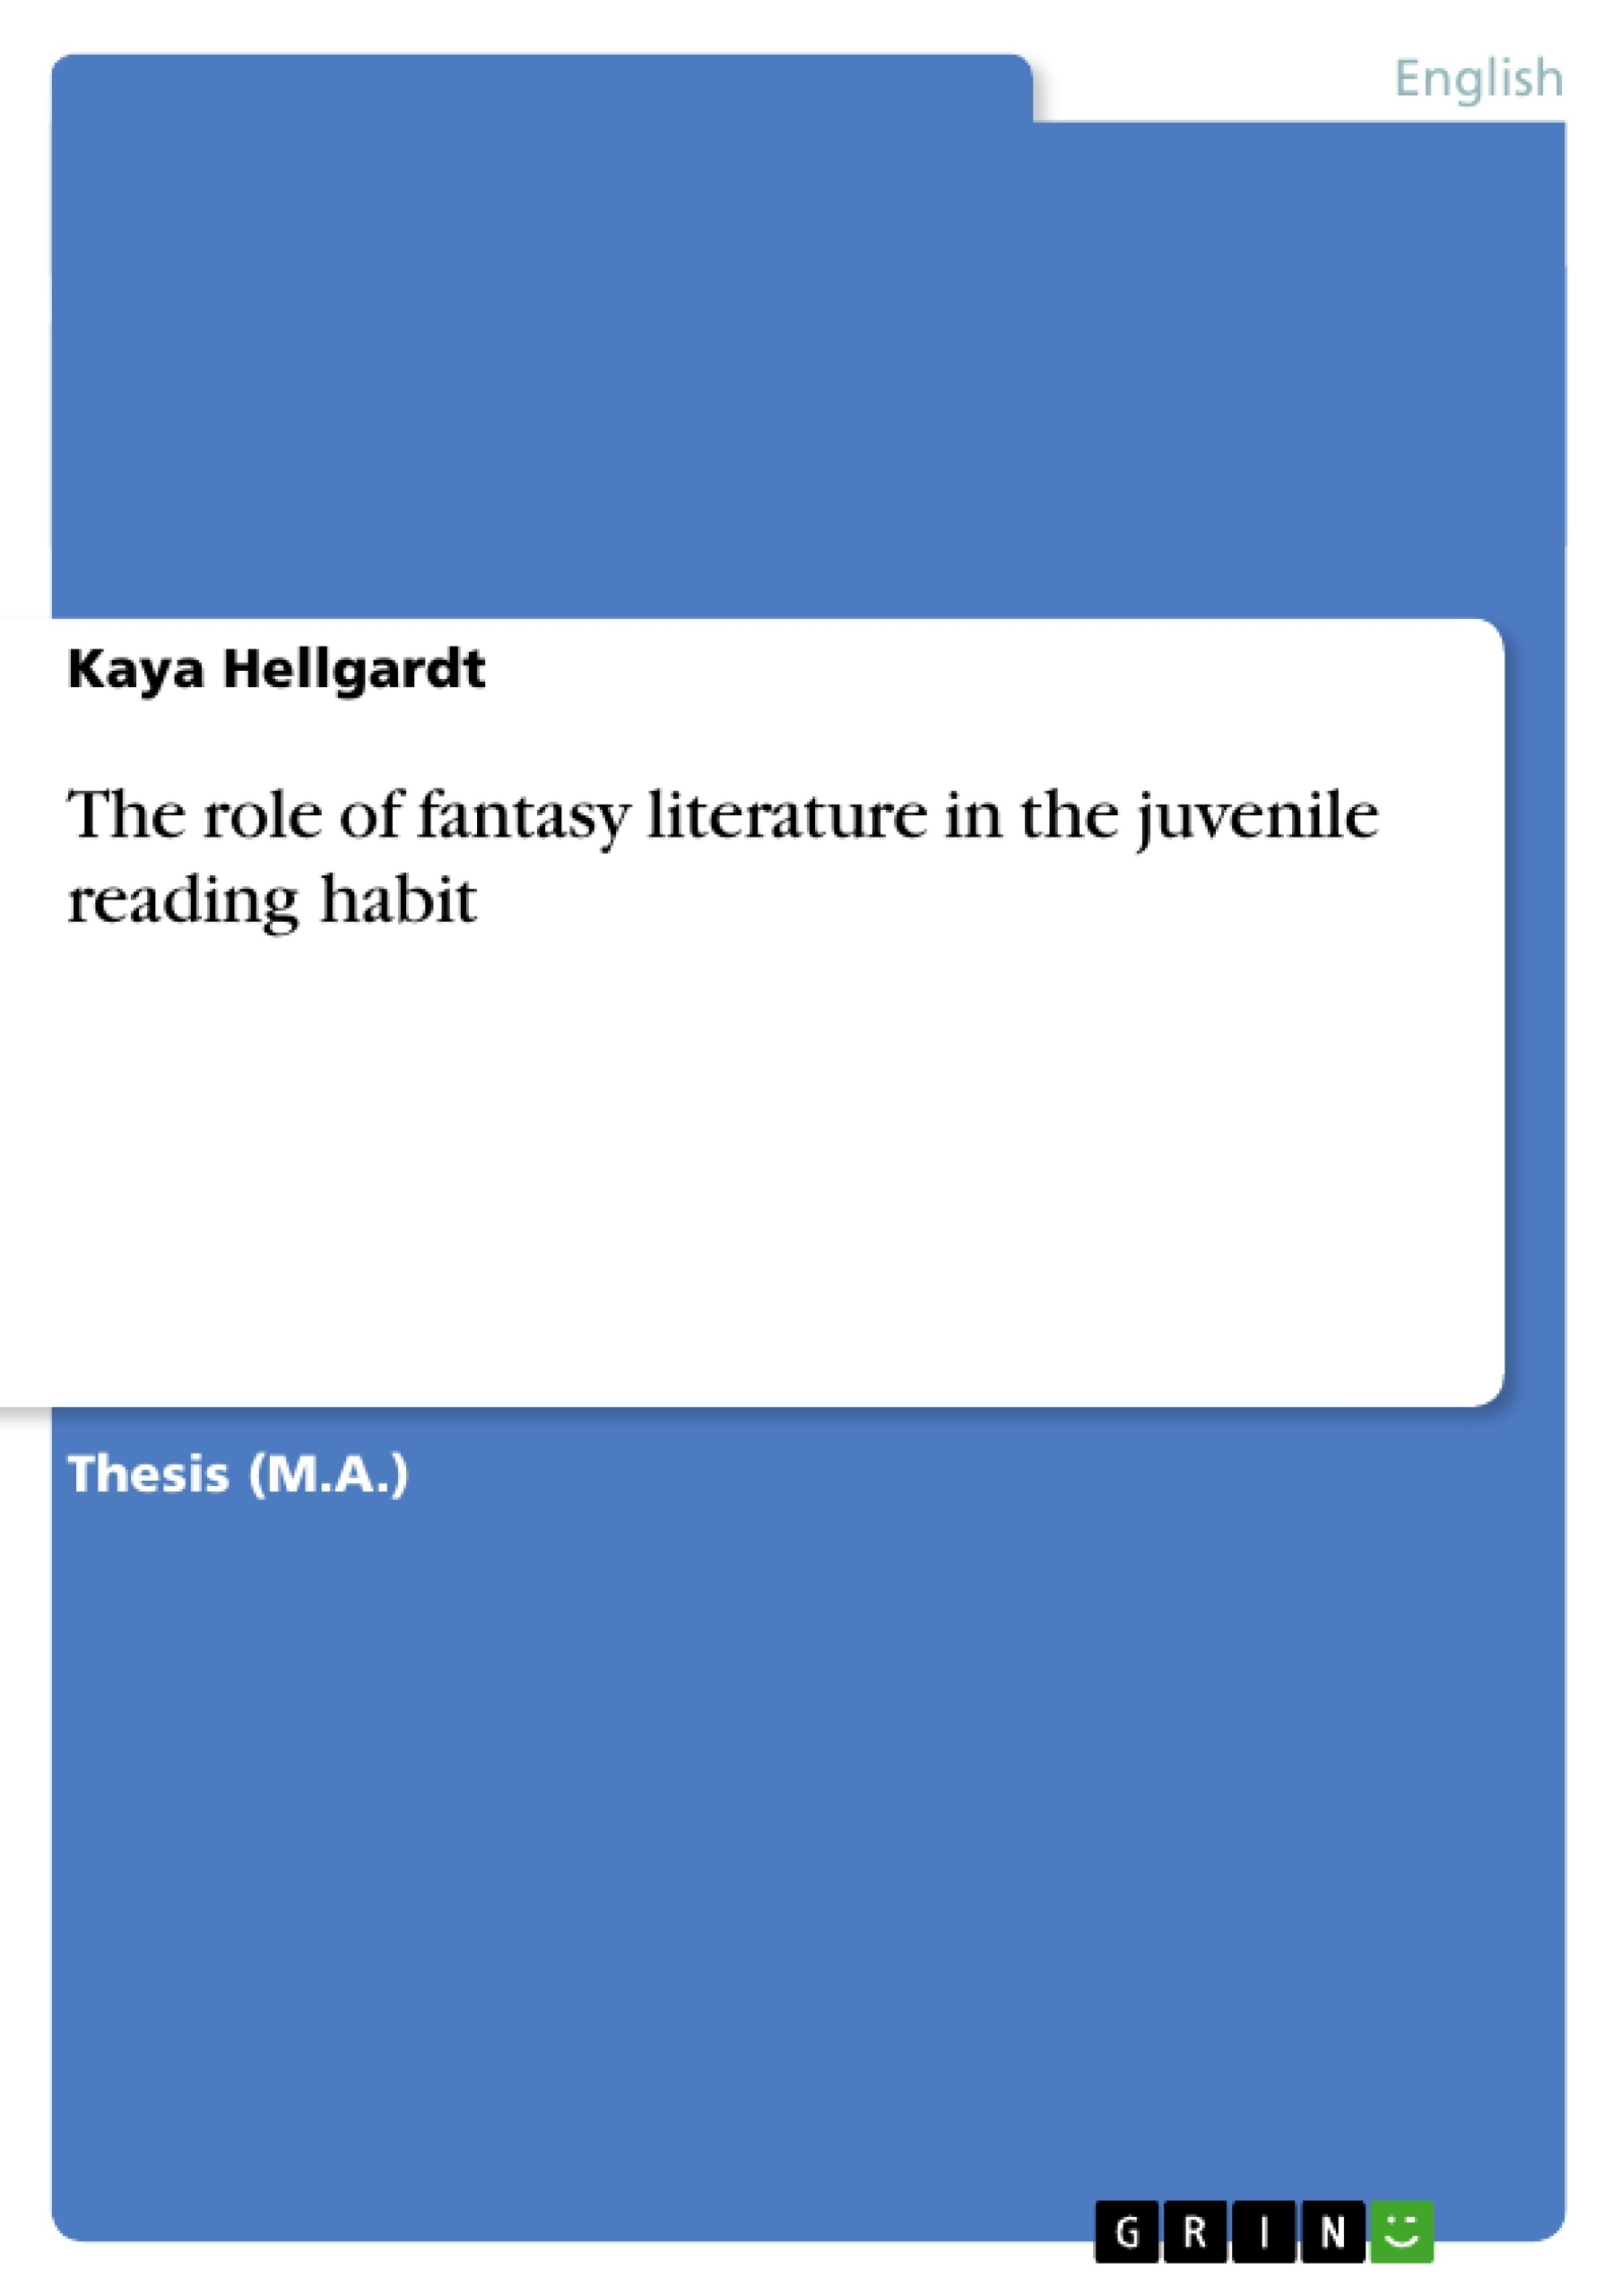 Title: The role of fantasy literature in the juvenile reading habit